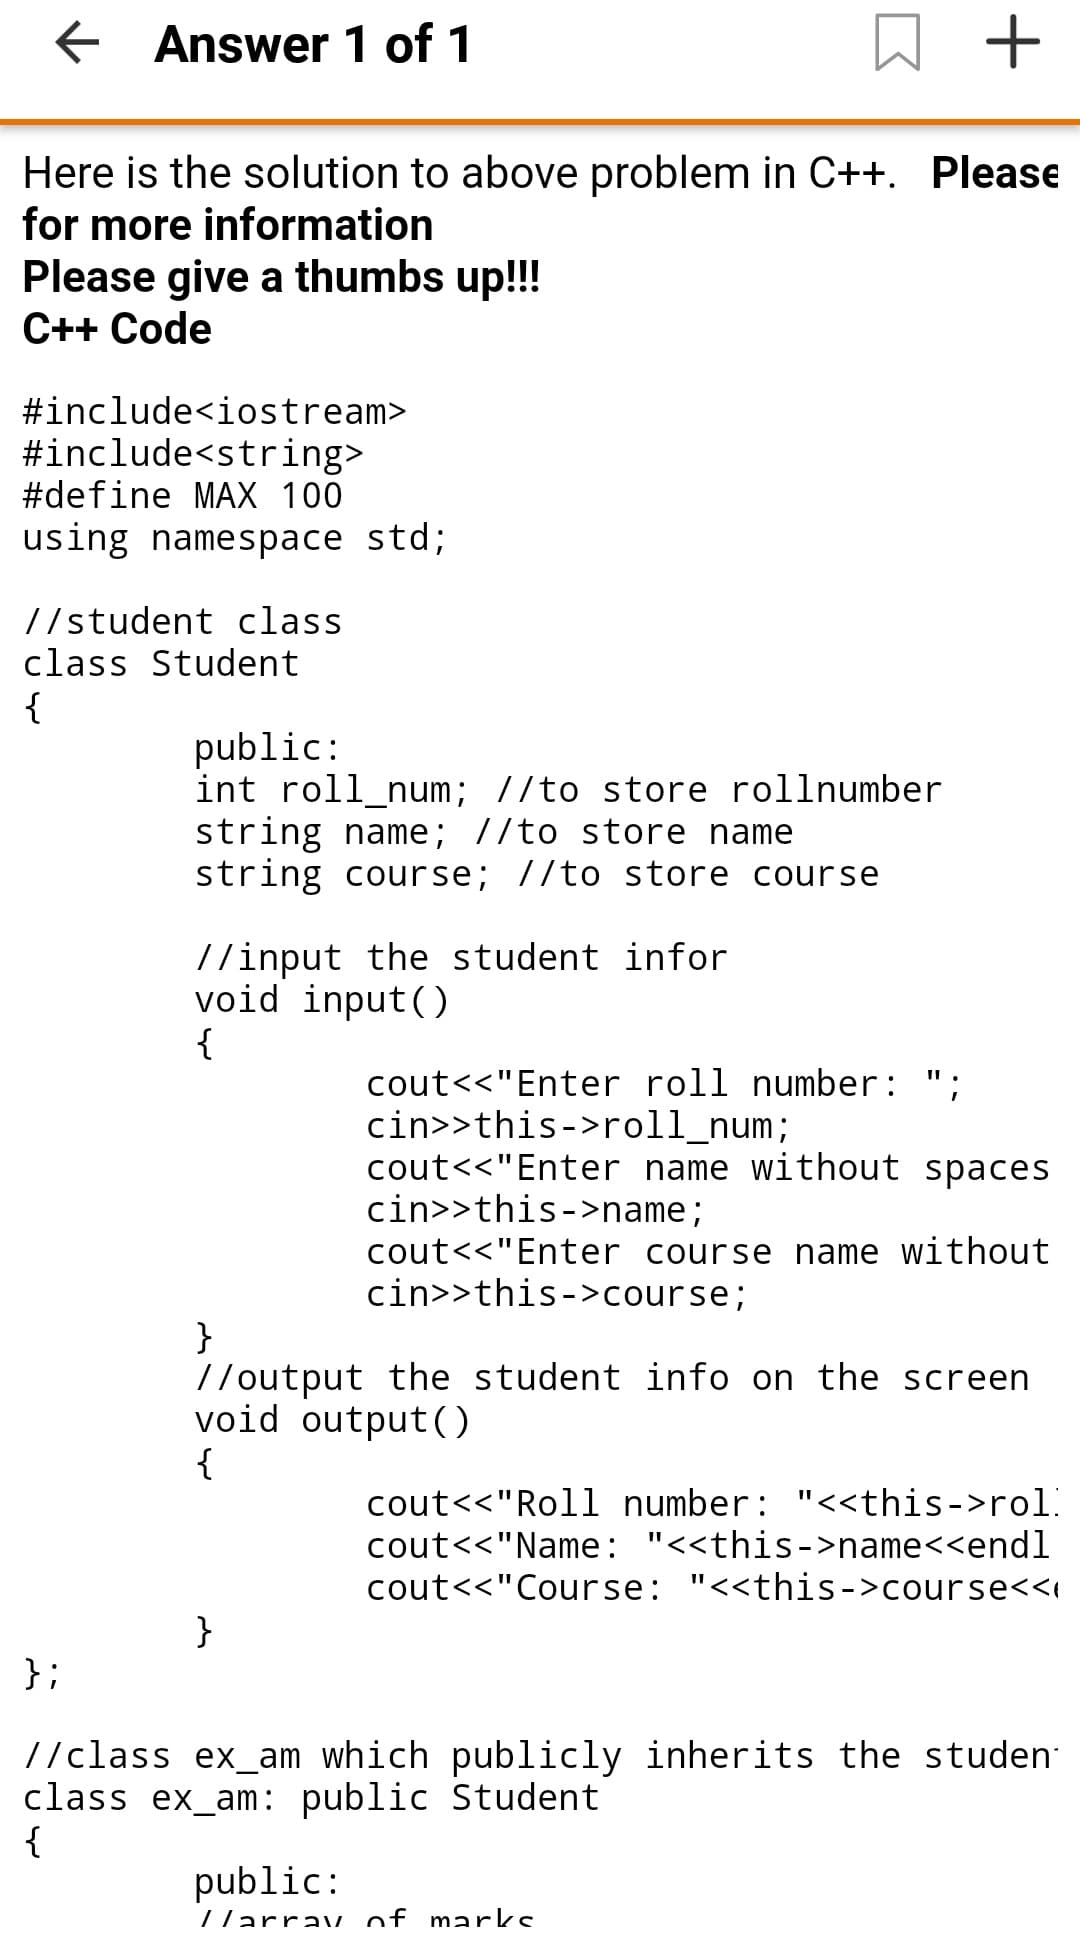 E Answer 1 of 1
Here is the solution to above problem in C++. Please
for more information
Please give a thumbs up!!!
C++ Code
#include<iostream>
#include<string>
#define MAX 100
using namespace std;
//student class
class Student
{
public:
int roll_num; //to store rollnumber
string name; 7/to store name
string course; //to store course
//input the student infor
void input()
{
cout<<"Enter roll number: ";
cin>>this->roll_num;
cout<<"Enter name without spaces
cin>>this->name;
cout<<"Enter course name without
cin>>this->course;
}
//output the student info on the screen
void output()
{
cout<<"Roll number: "<<this->rol.
cout<<"Name: "<<this->name<<endl
cout<<"Course: "<<this->course<<i
}
};
//class ex_am which publicly inherits the studen
class ex_am: public Student
{
public:
/larrav of marks
